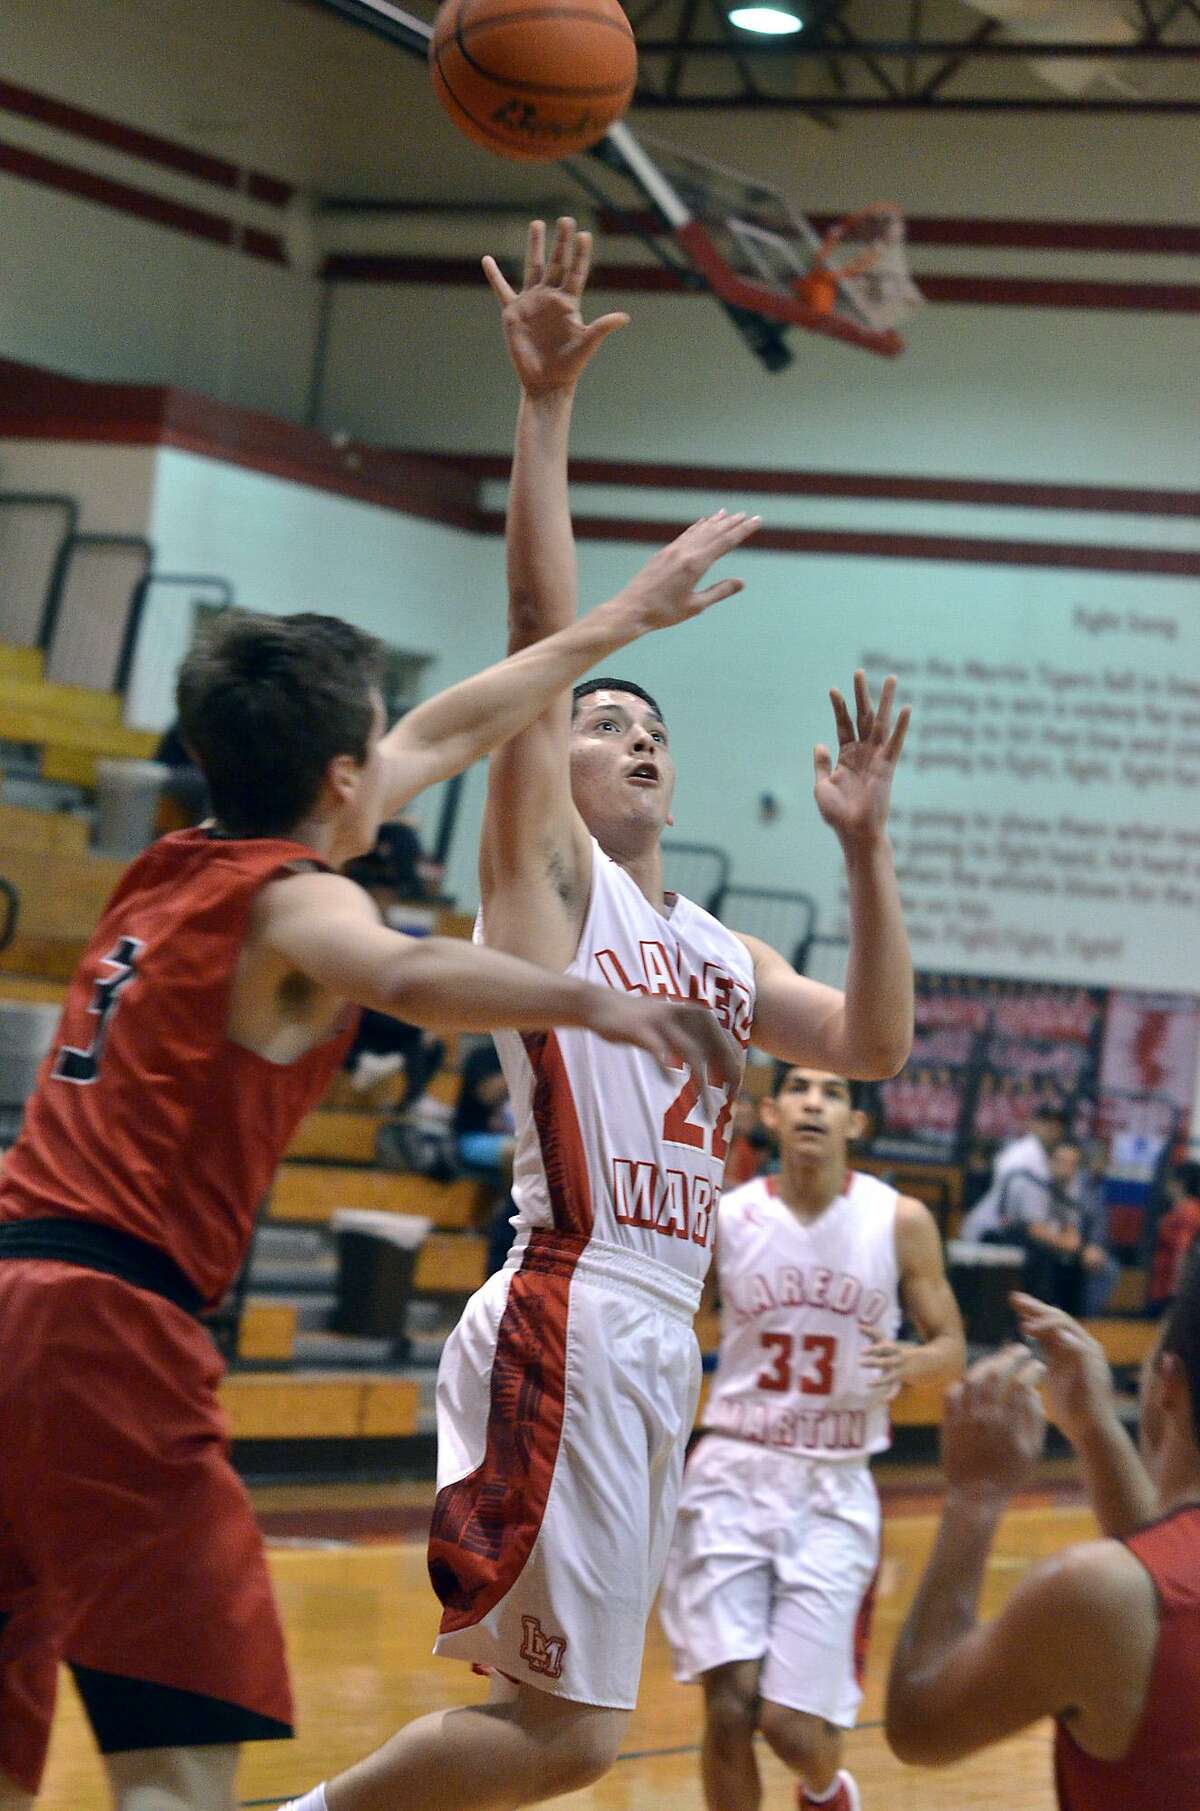 Martin’s Kevin Zamora scored nine points and dished out six assists as the Tigers remained perfect in District 31-5A at 9-0.